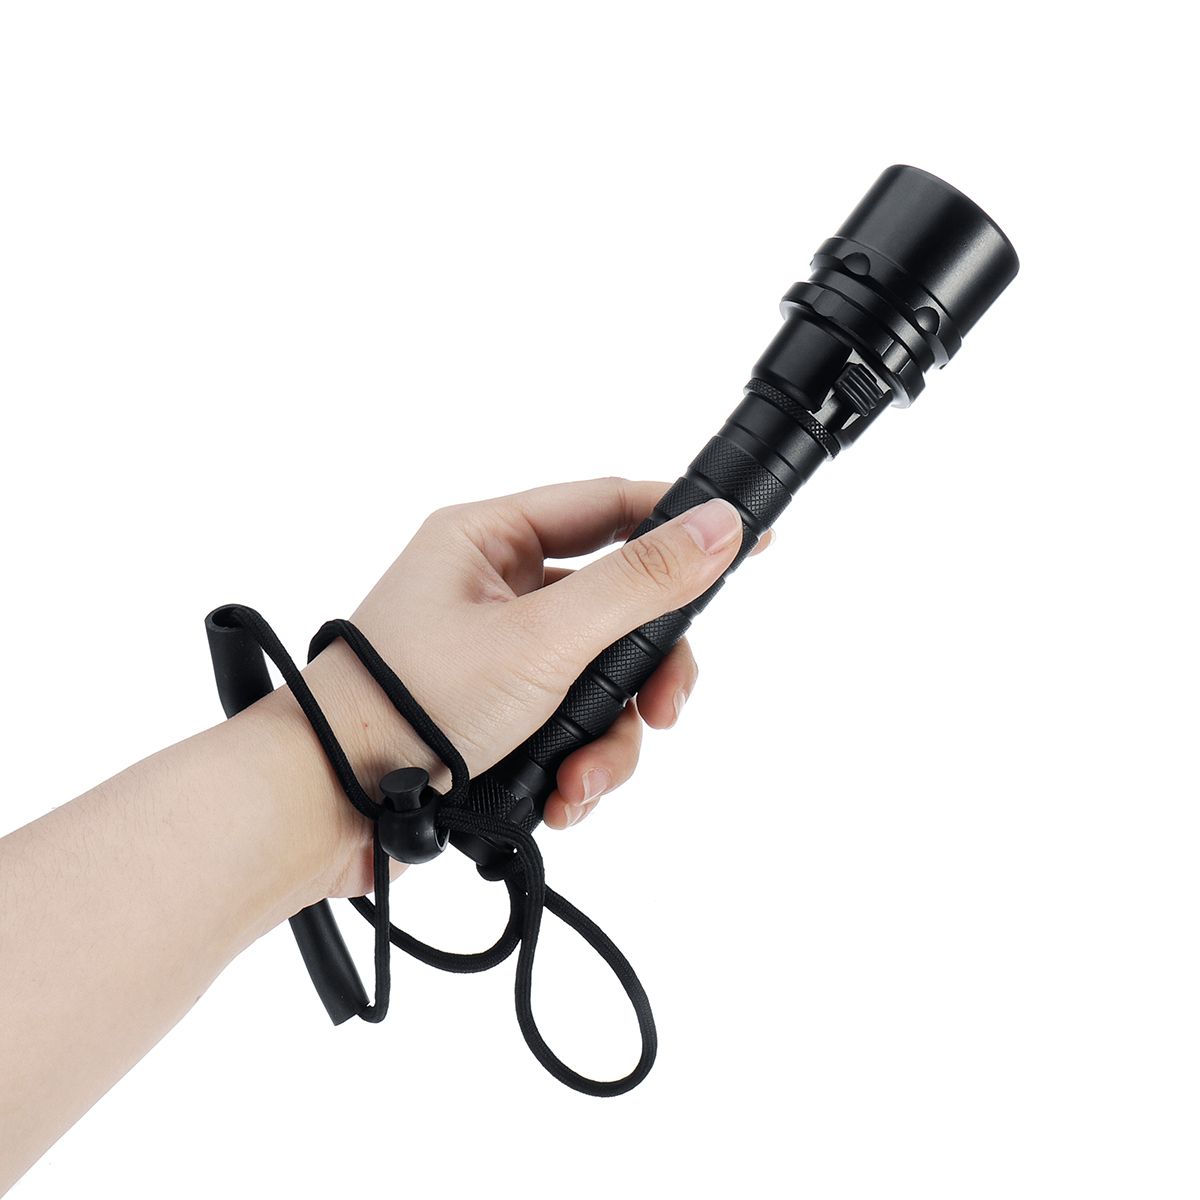 Rechargeable-T6-LED-Scuba-Diving-Flashlight-Waterproof-Underwater-Snorkeling-Torch-1533183